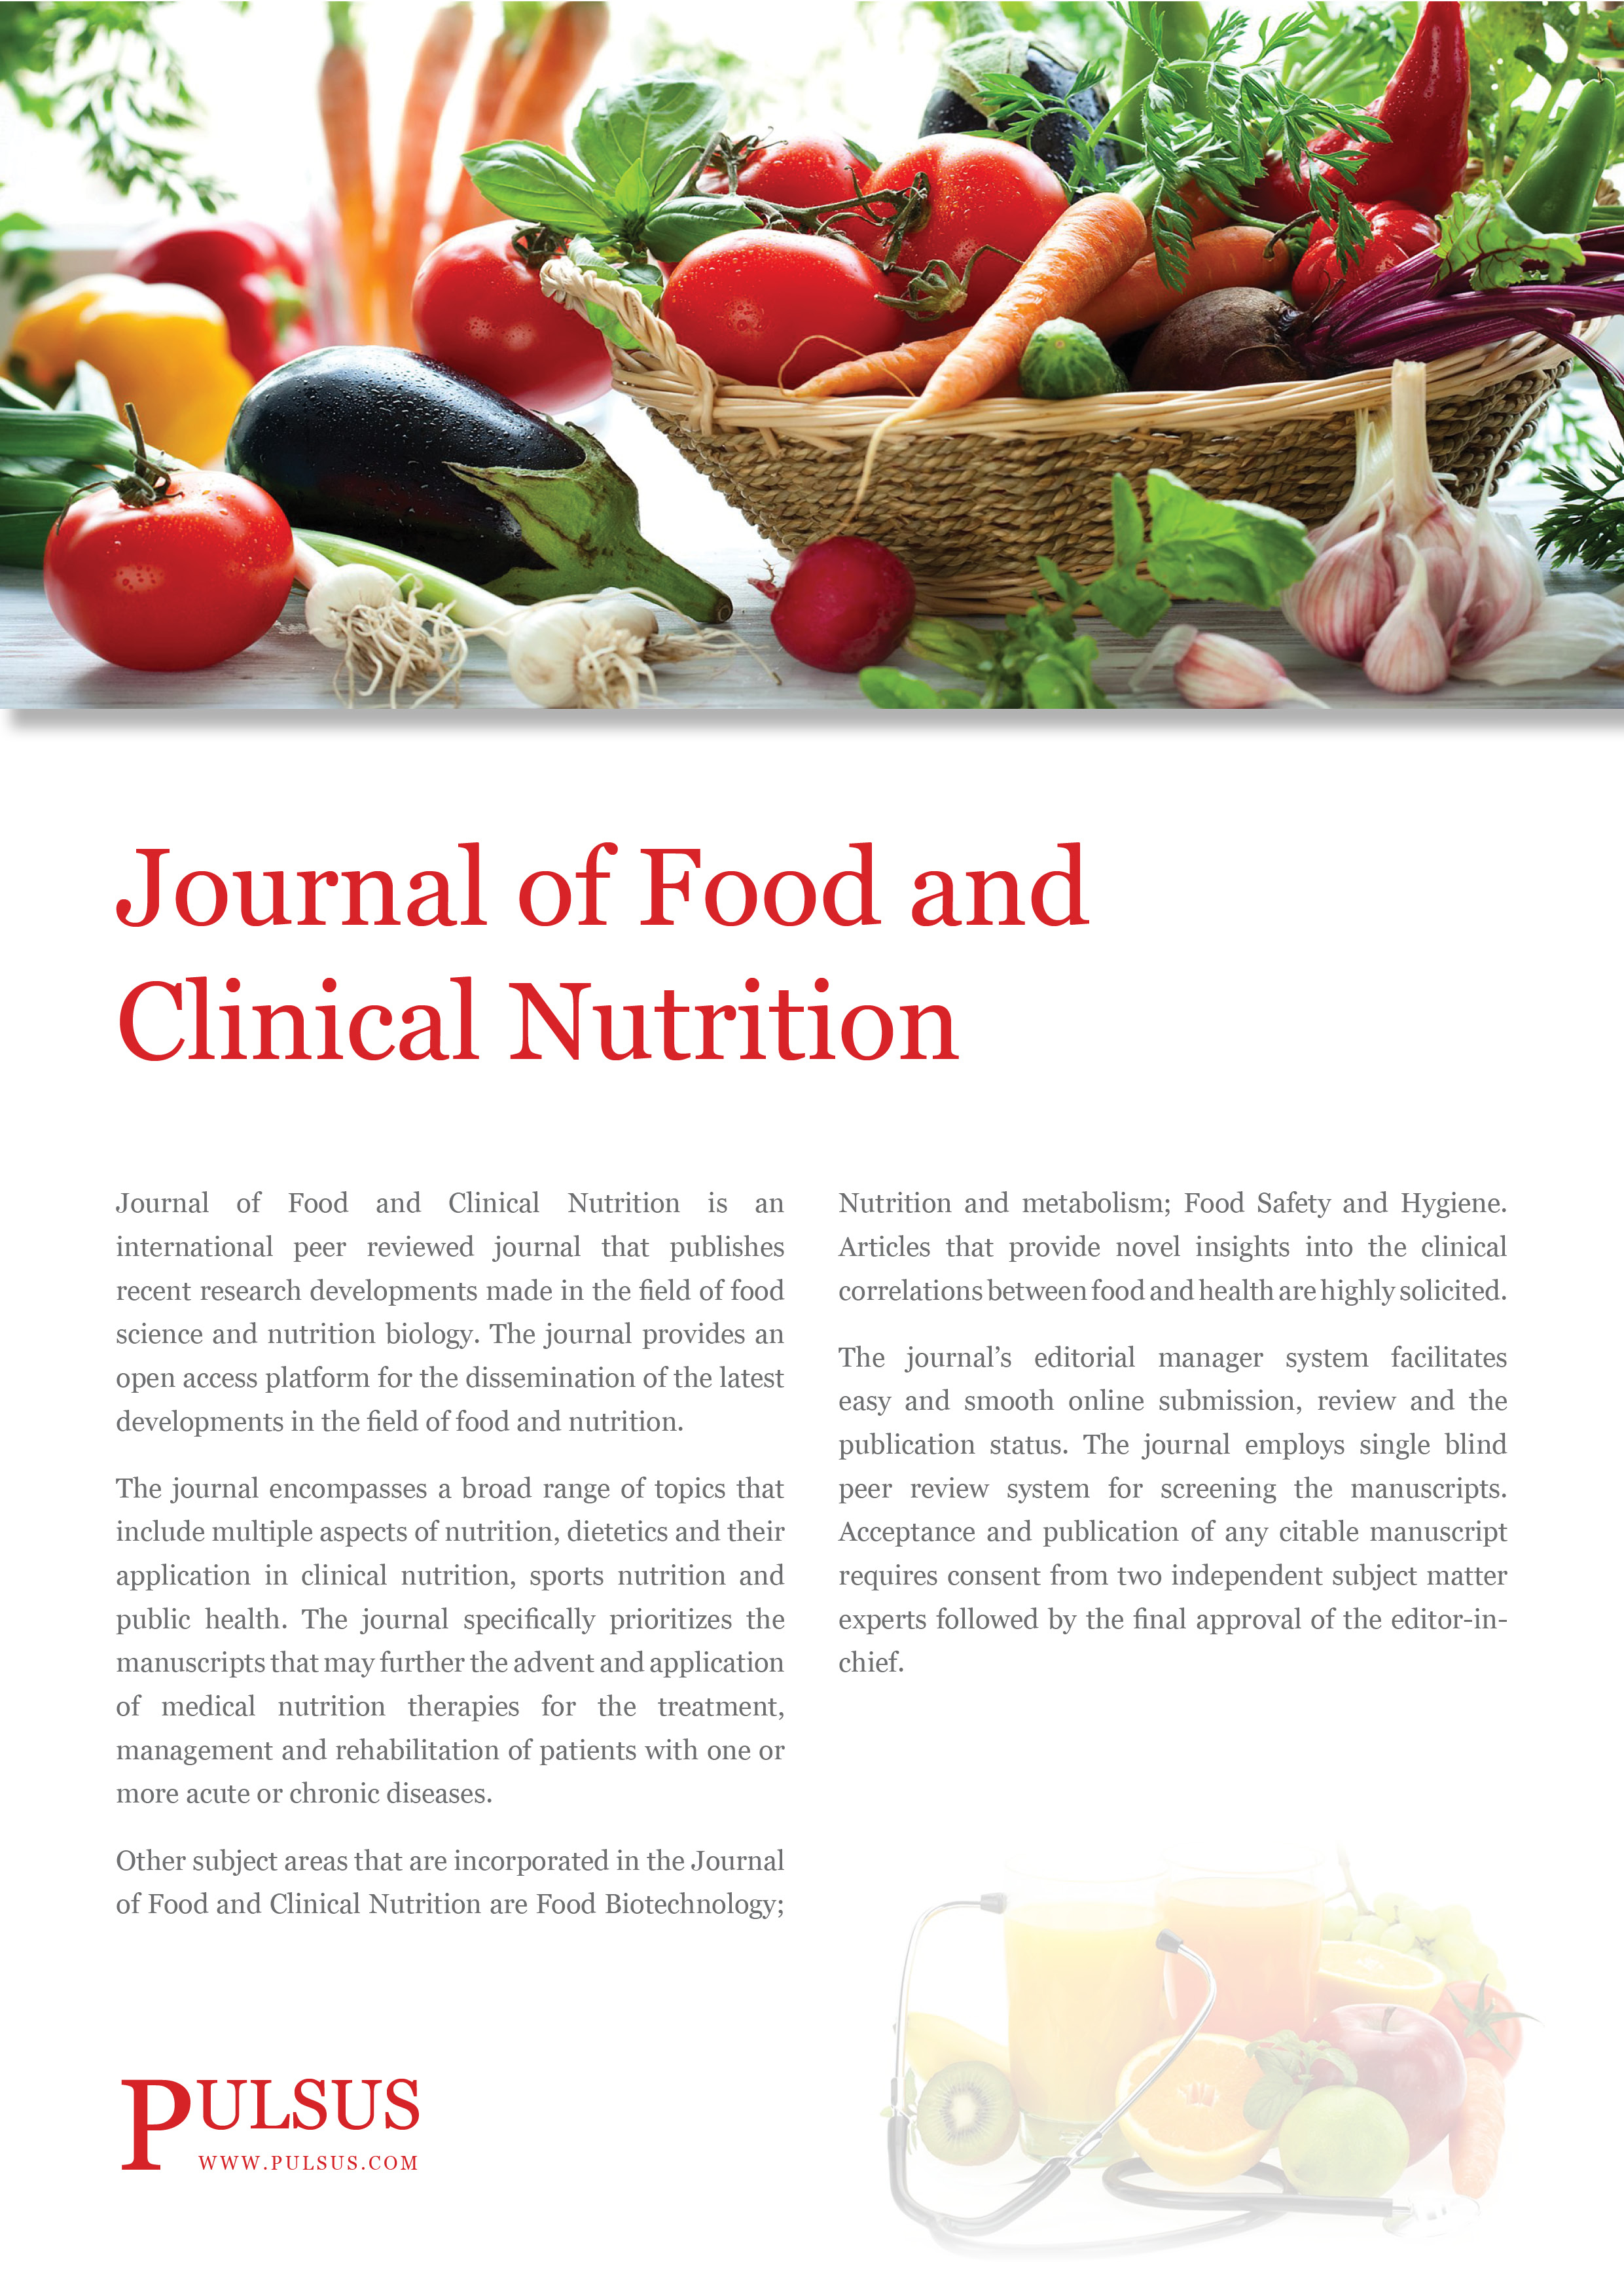 food science and nutrition topics